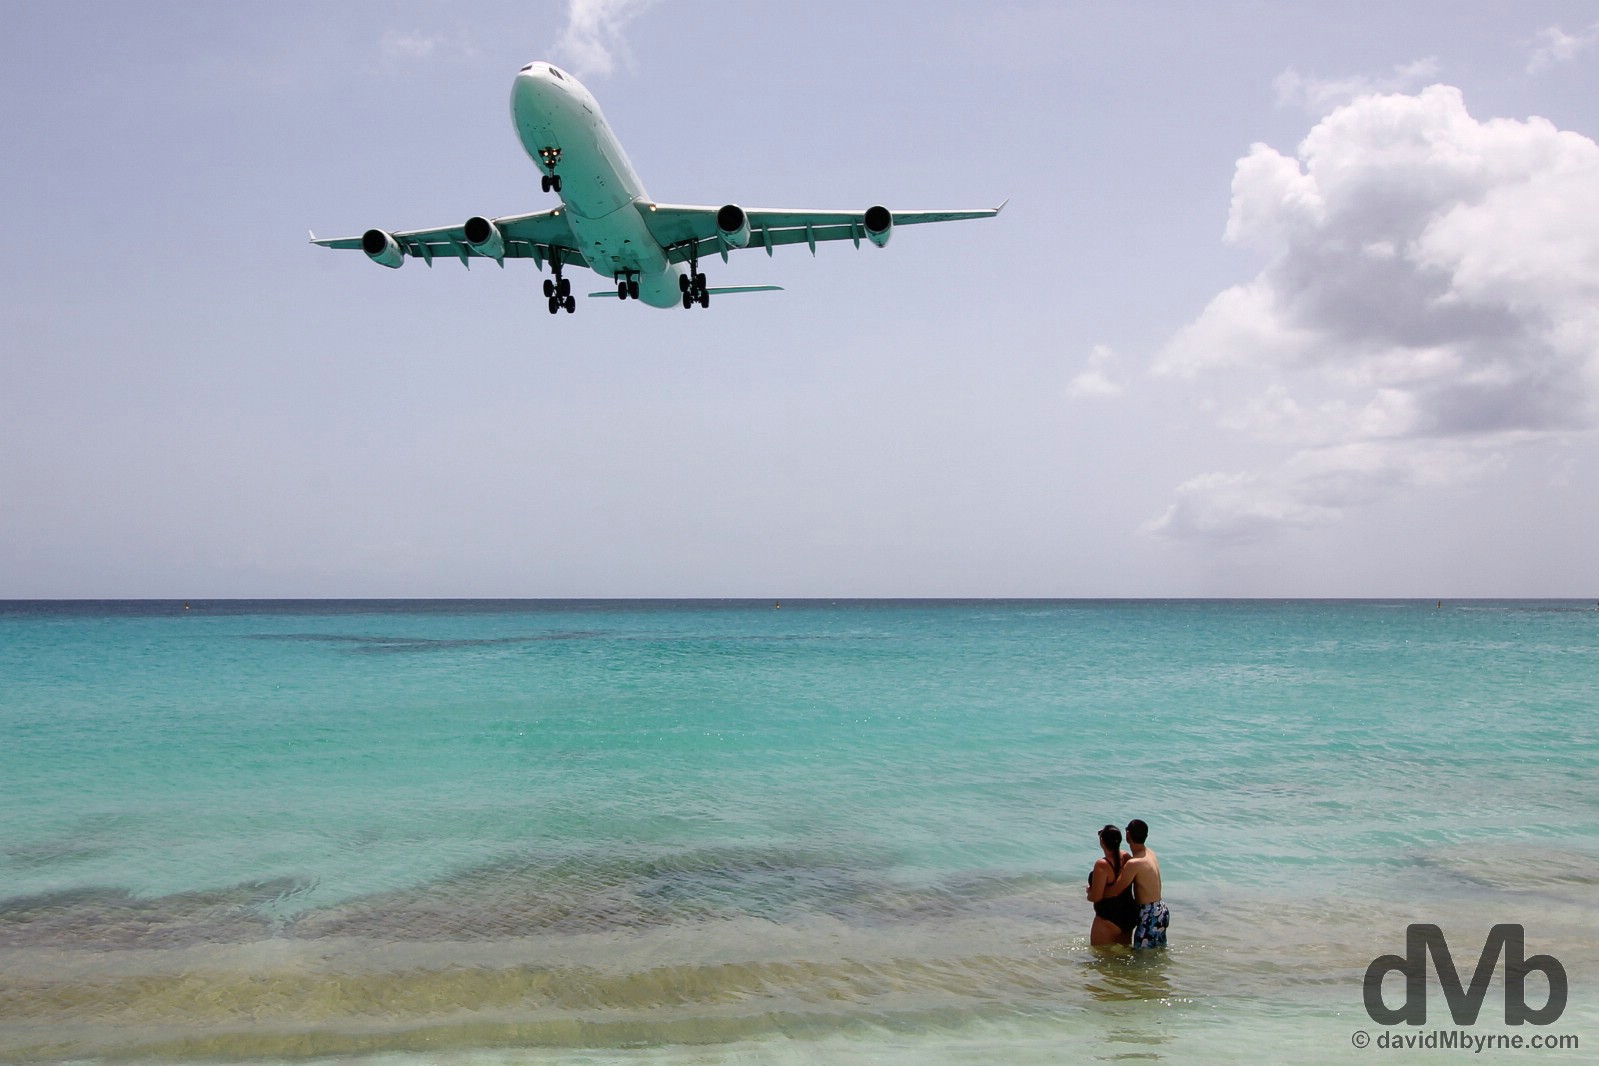 An approach to Juliana Airport as viewed from the warm waters of Maho Bay, Sint Maarten, Lesser Antilles. June 8, 2015.